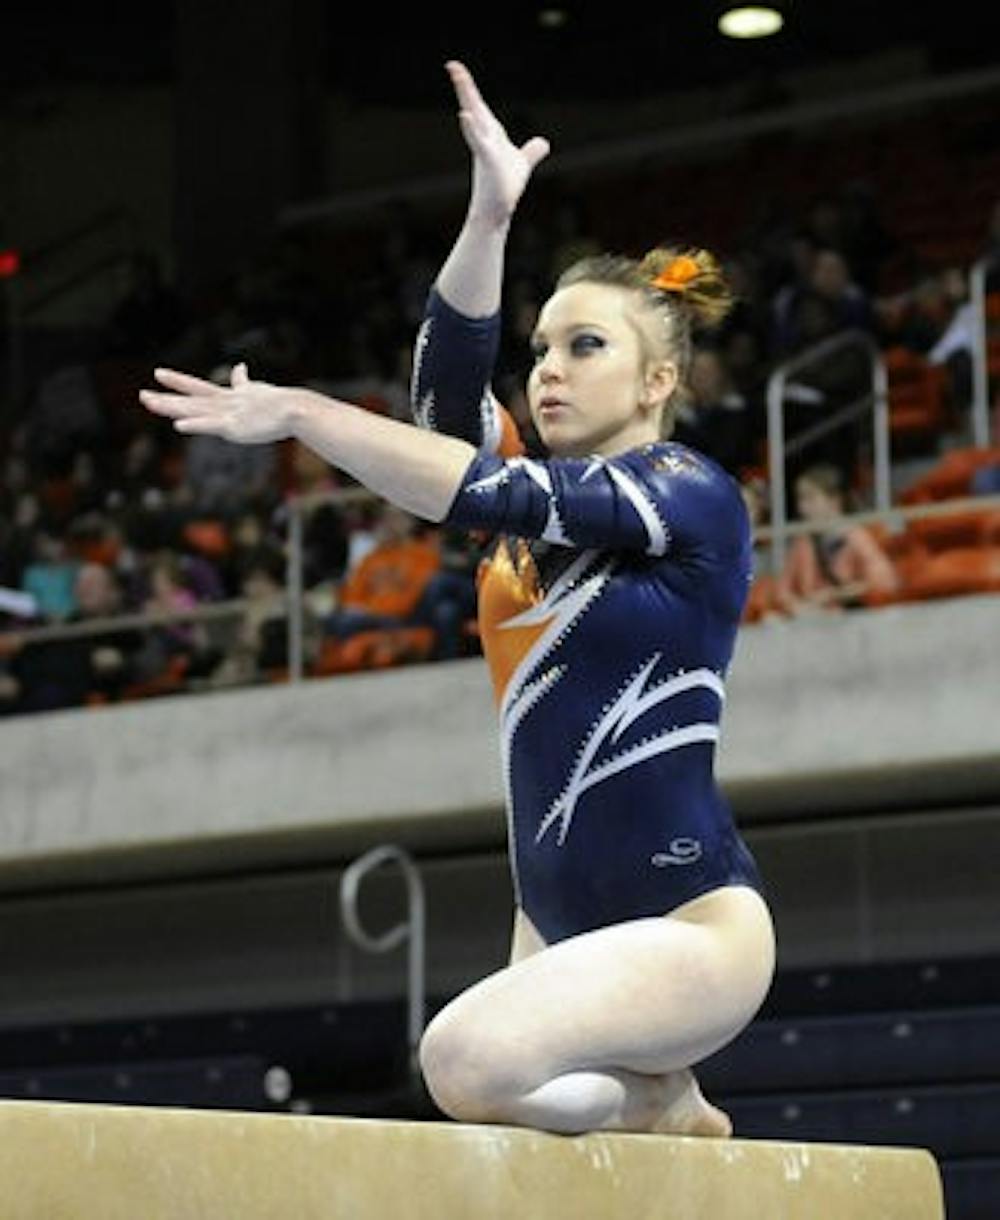 Auburn's Caitlin Atkinson competing on the beam against LSU Friday, Feb. 22. (Courtesy of Todd Van Emst)